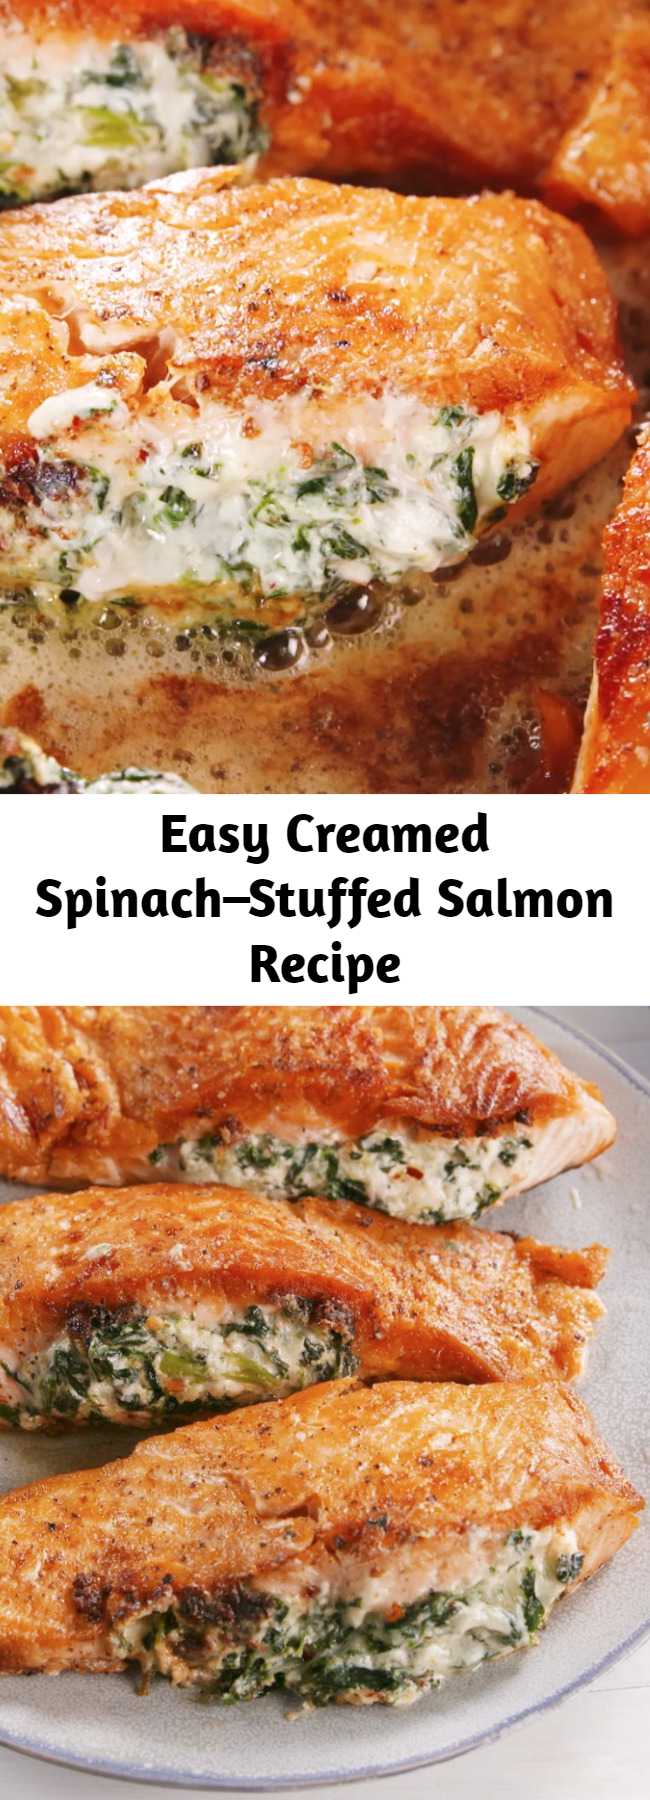 Easy Creamed Spinach–Stuffed Salmon Recipe - If you're skeptical about the combination of cheese and salmon, don't be. We promise you, it's AMAZING. #easy #recipe #salmon #stuffed #seafood #dinners #creamcheese #cheesy #garlic #stuffing